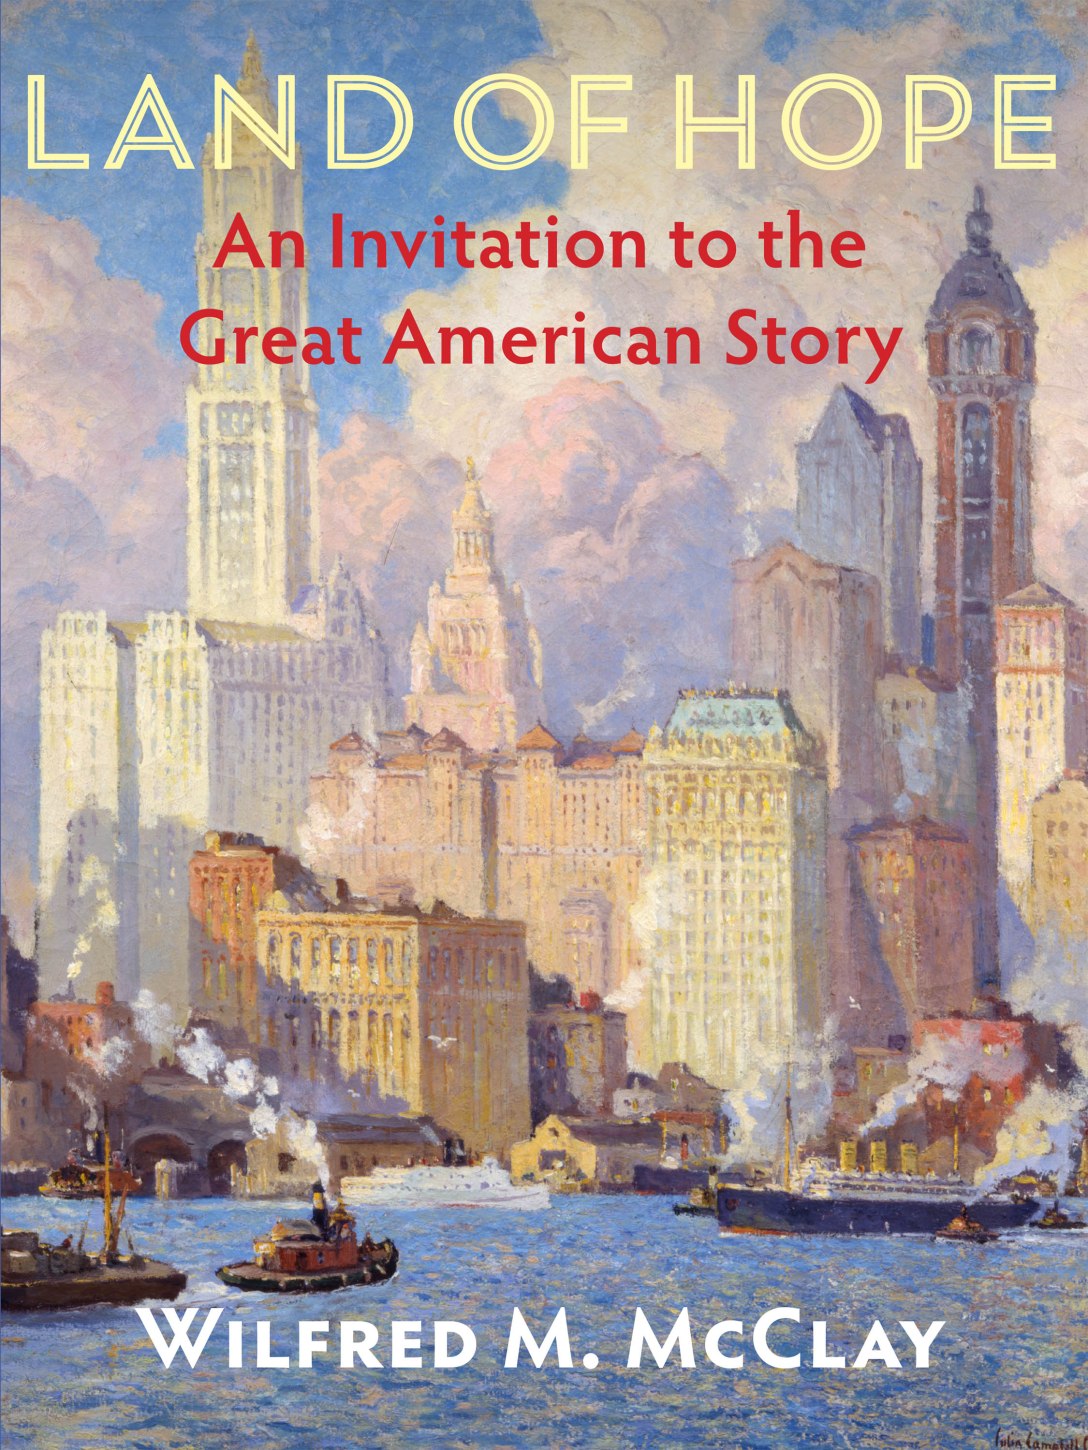 Cover image of Dr. McClay's textbook entitled Land of Hope: An Invitation to the Great American Story.